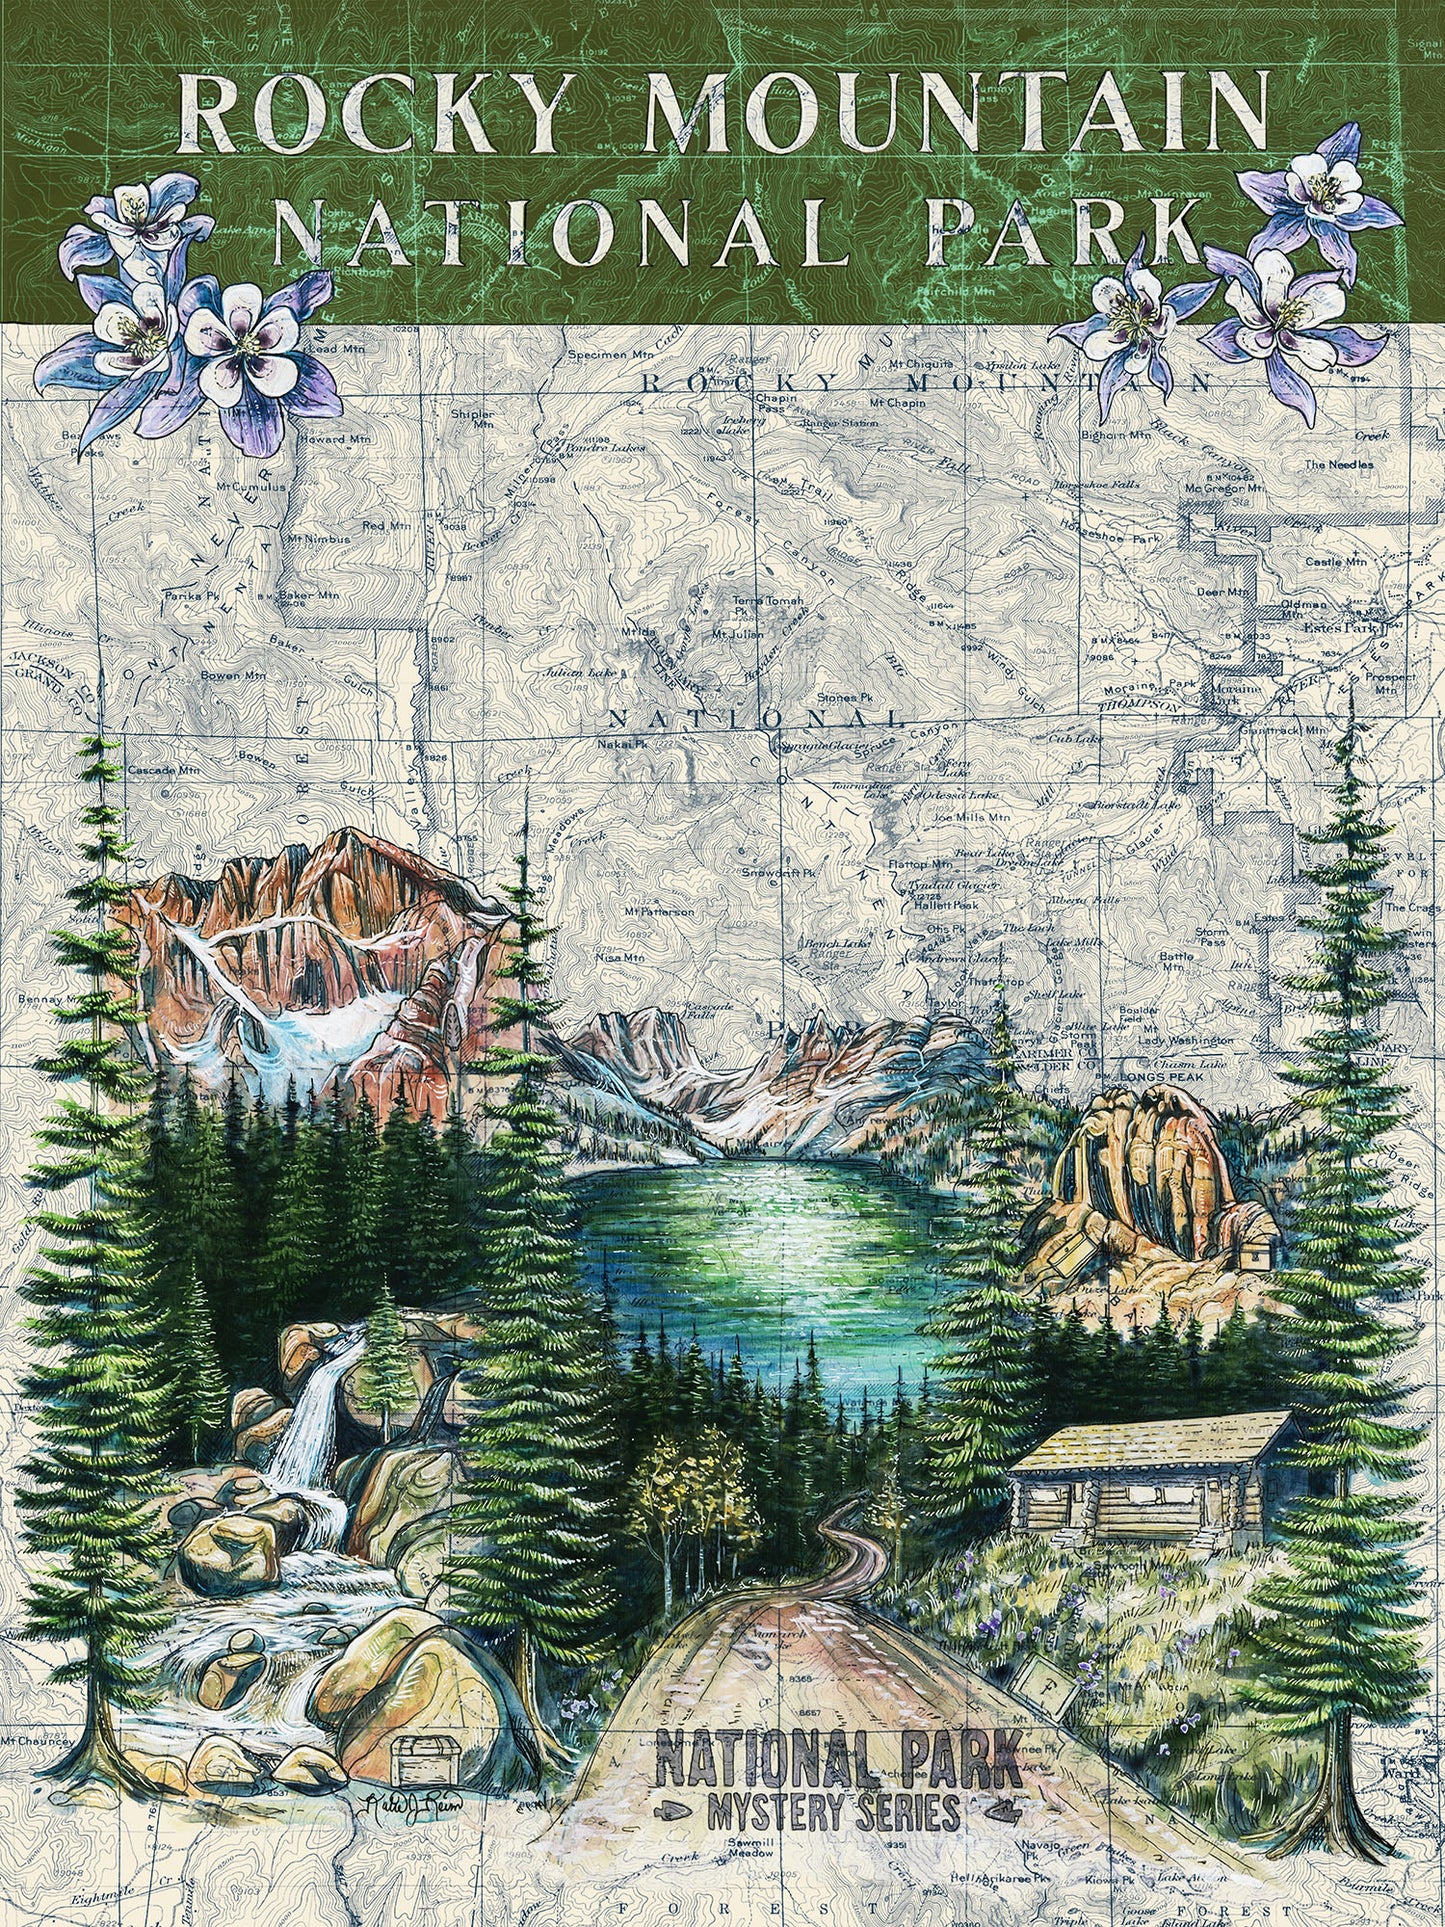 National Park Mystery Series Poster - Rocky Mountain